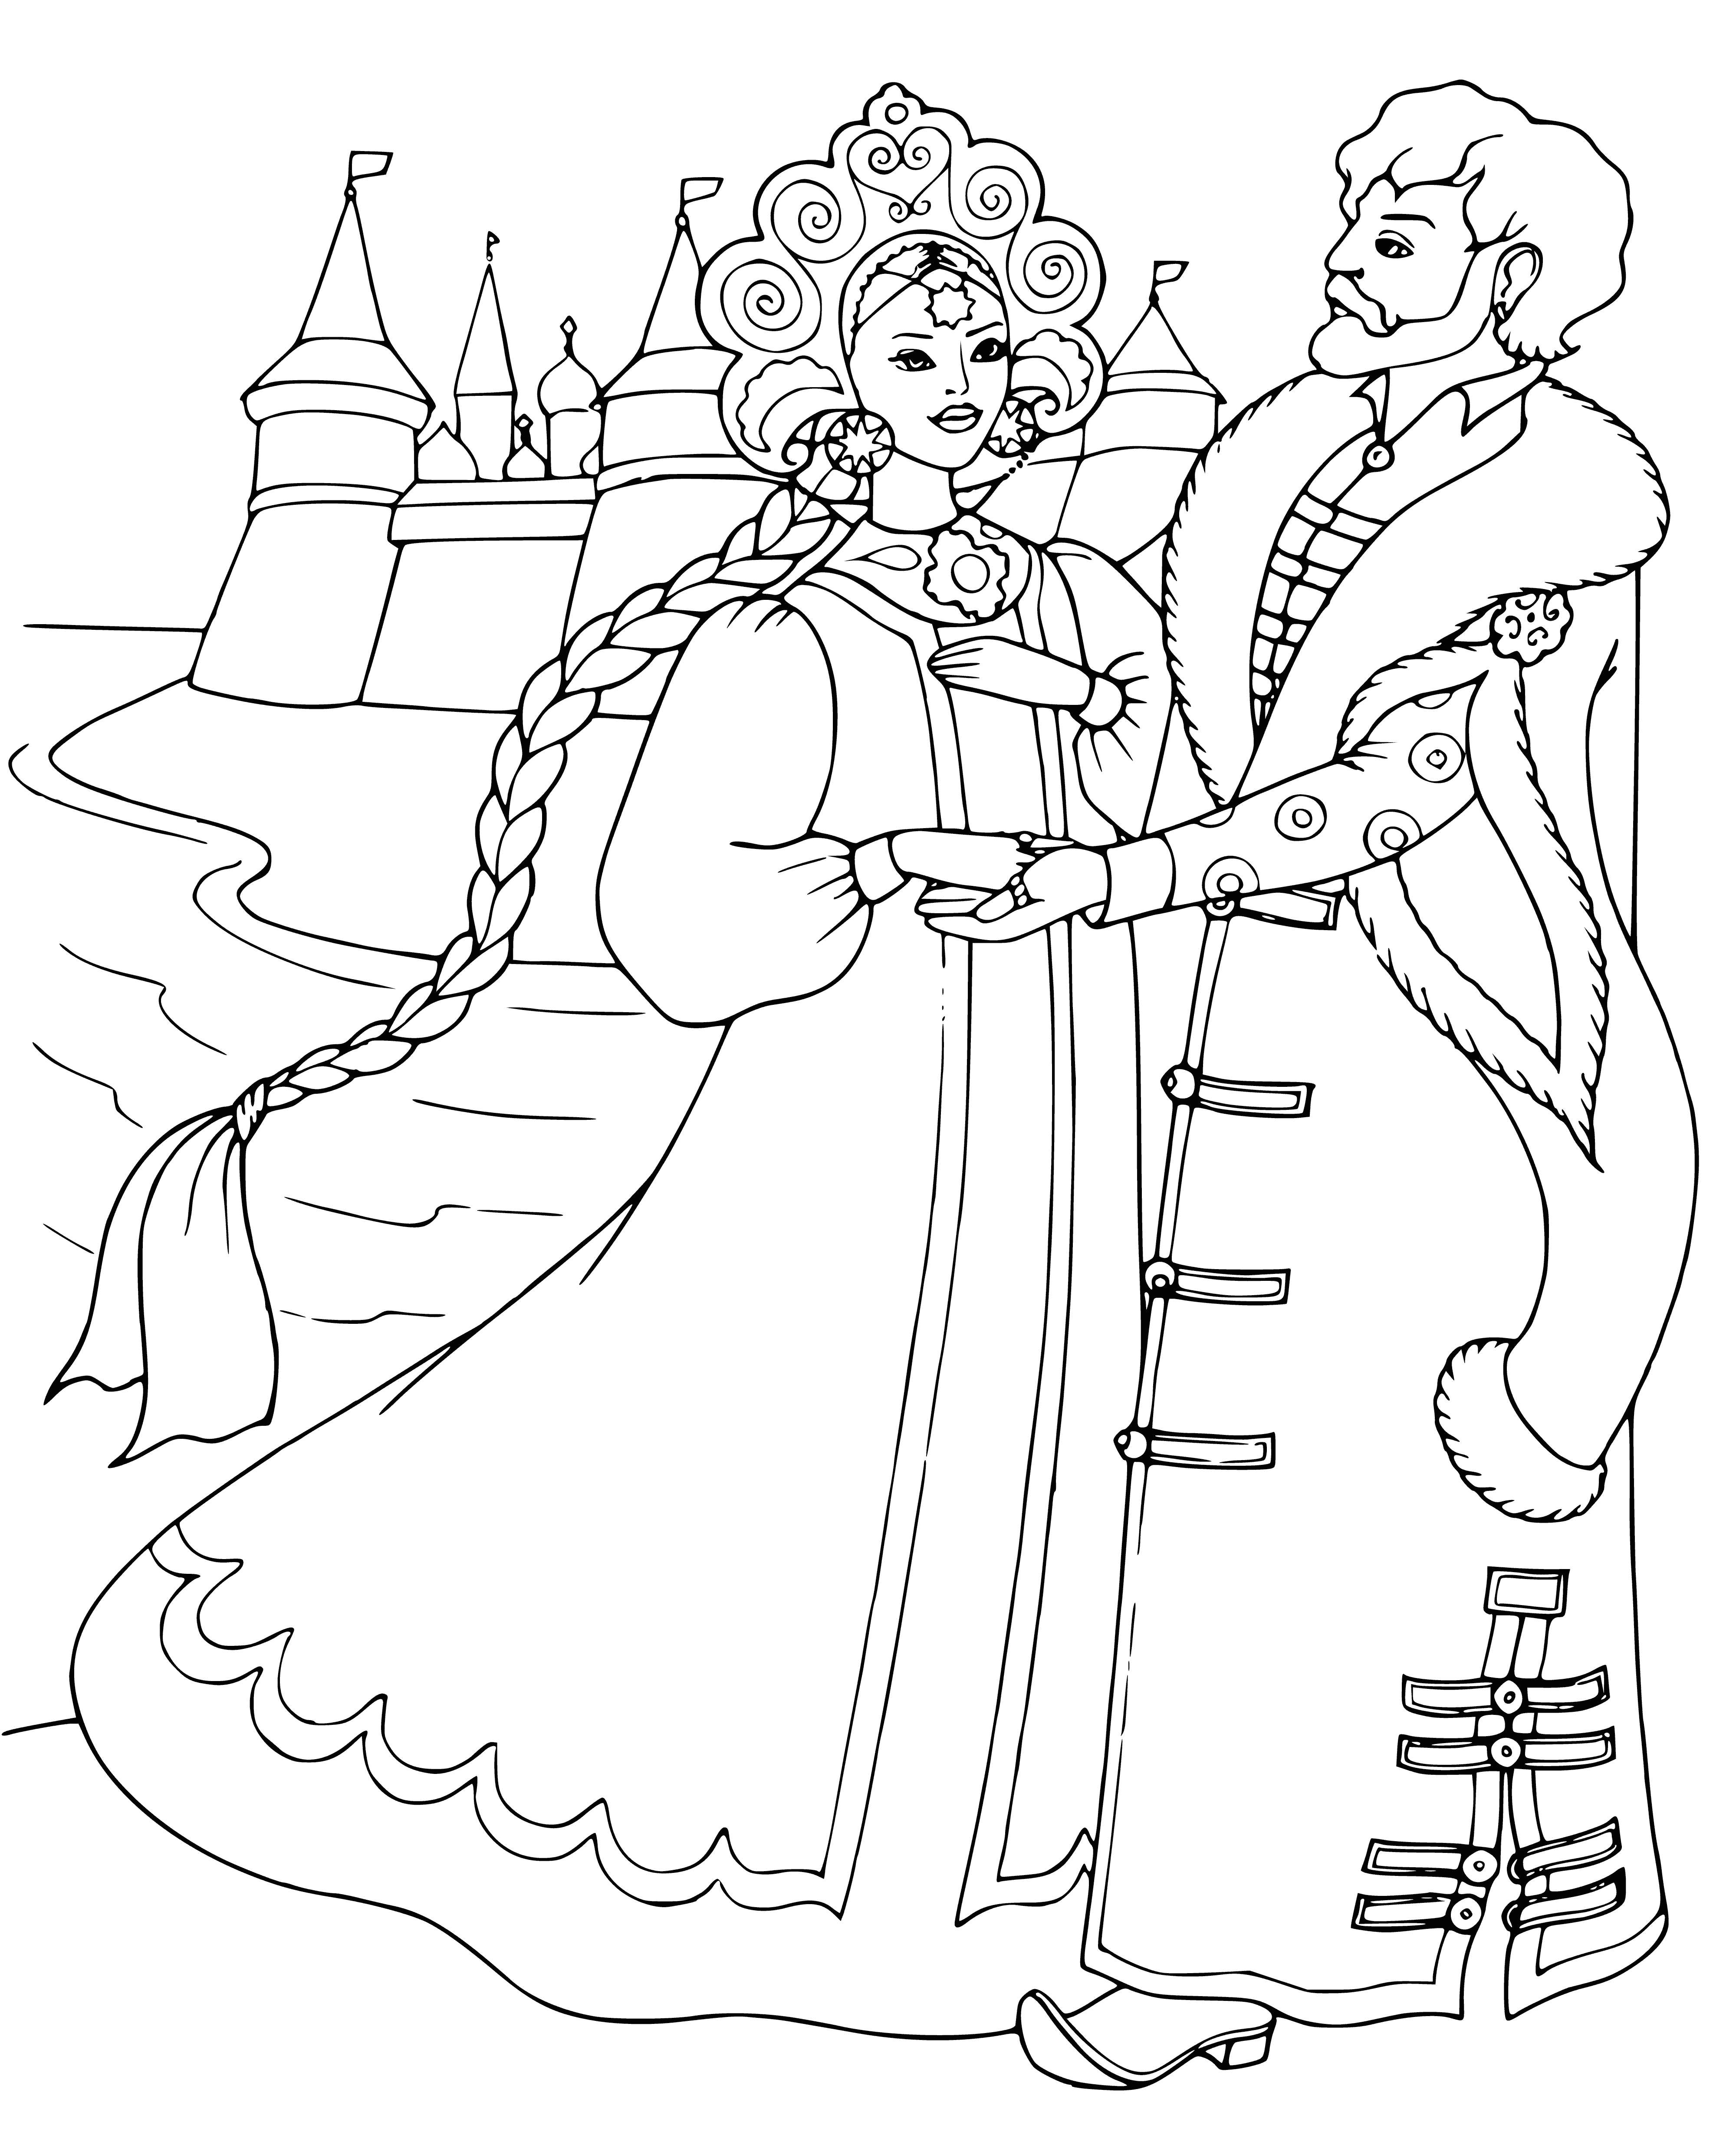 coloring page: Prince kneels before Swan Princess, embracing her neck and face buried in feathers. She looks down upon him gently, castle seen in the distance.